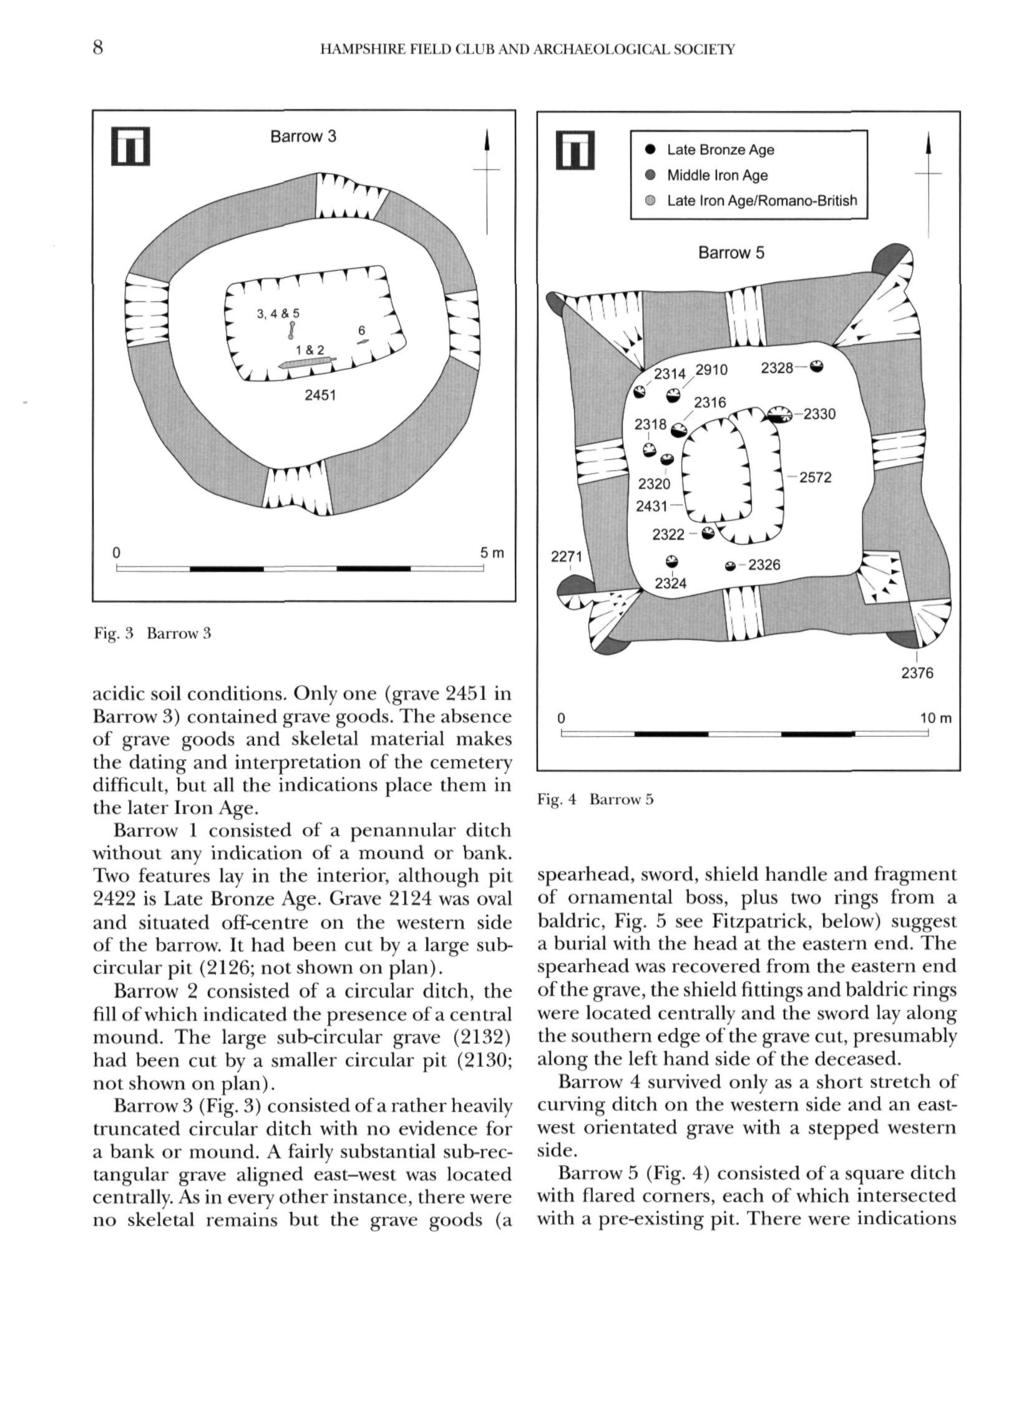 8 HAMPSHIRE FIELD CLUB ARCHAEOLOGICAL SOCIETY Fig. 3 Barrow 3 acidic soil conditions. Only one (grave 2451 in Barrow 3) contained grave goods.